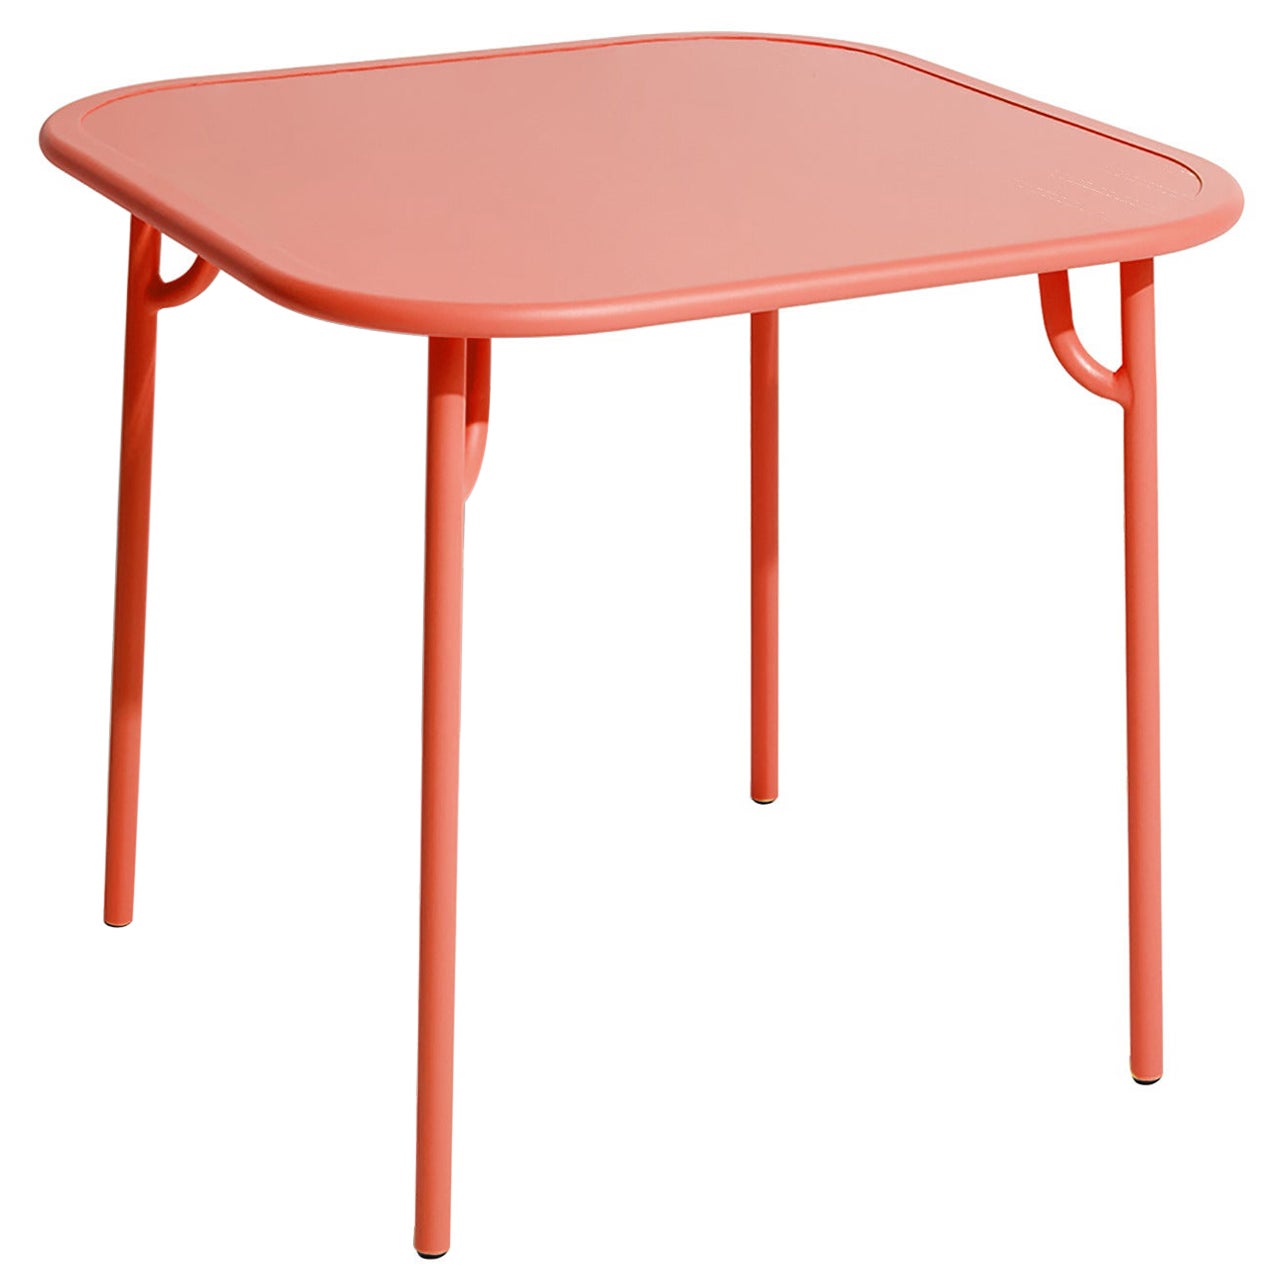 Petite Friture Week-End Plain Square Dining Table in Coral Aluminium, 2017 For Sale